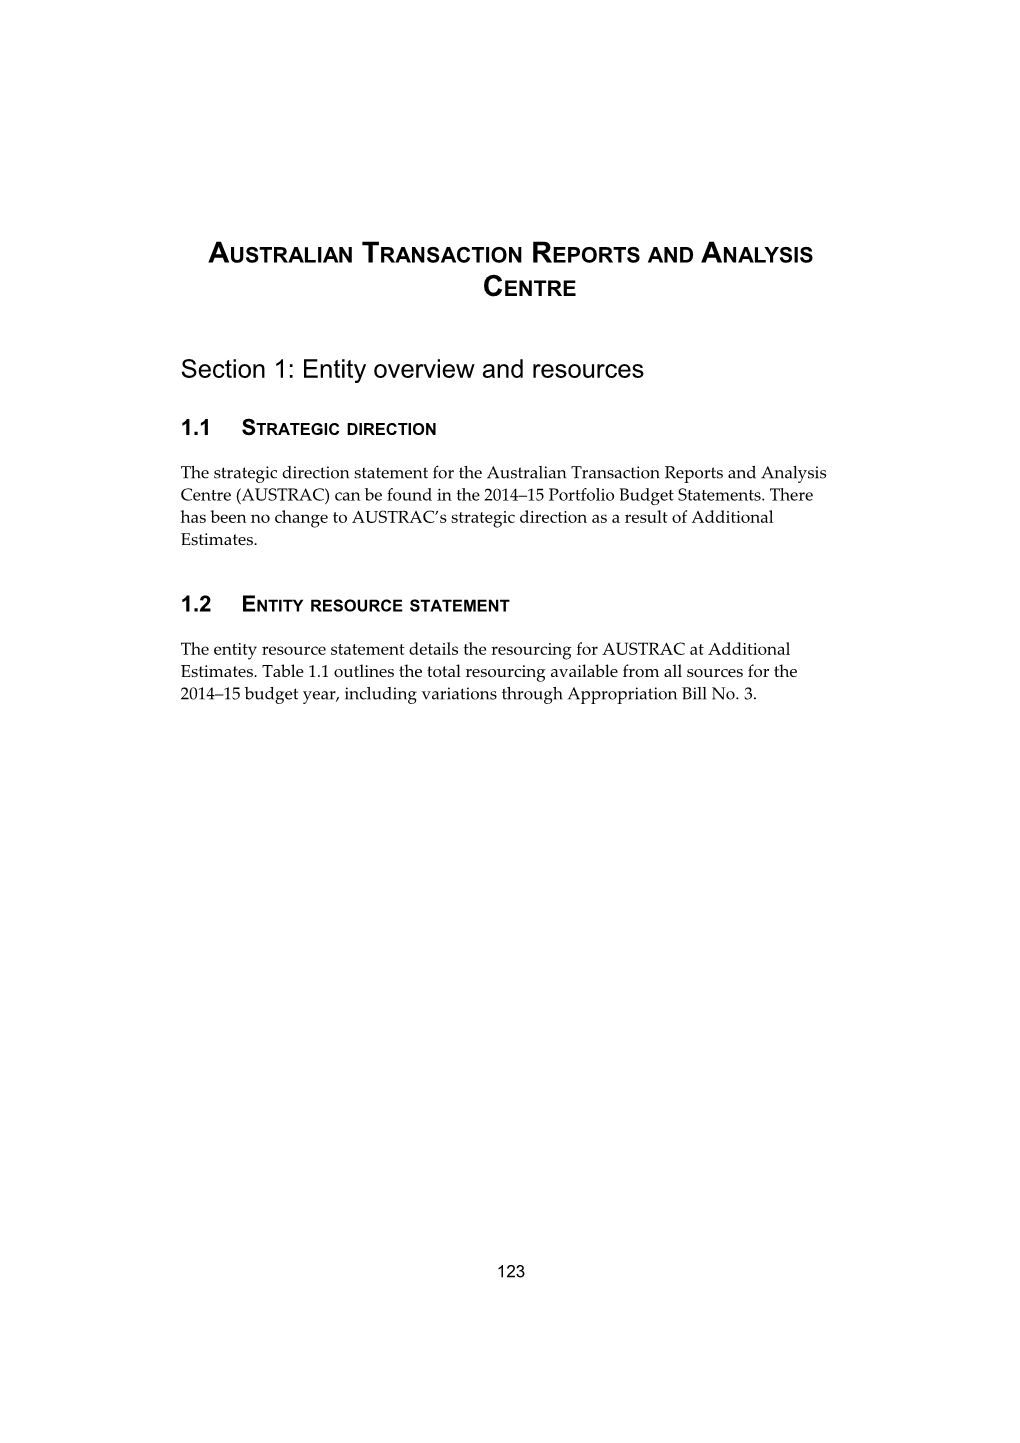 2014-15 Paes Australian Transaction Reports and Analysis Centre